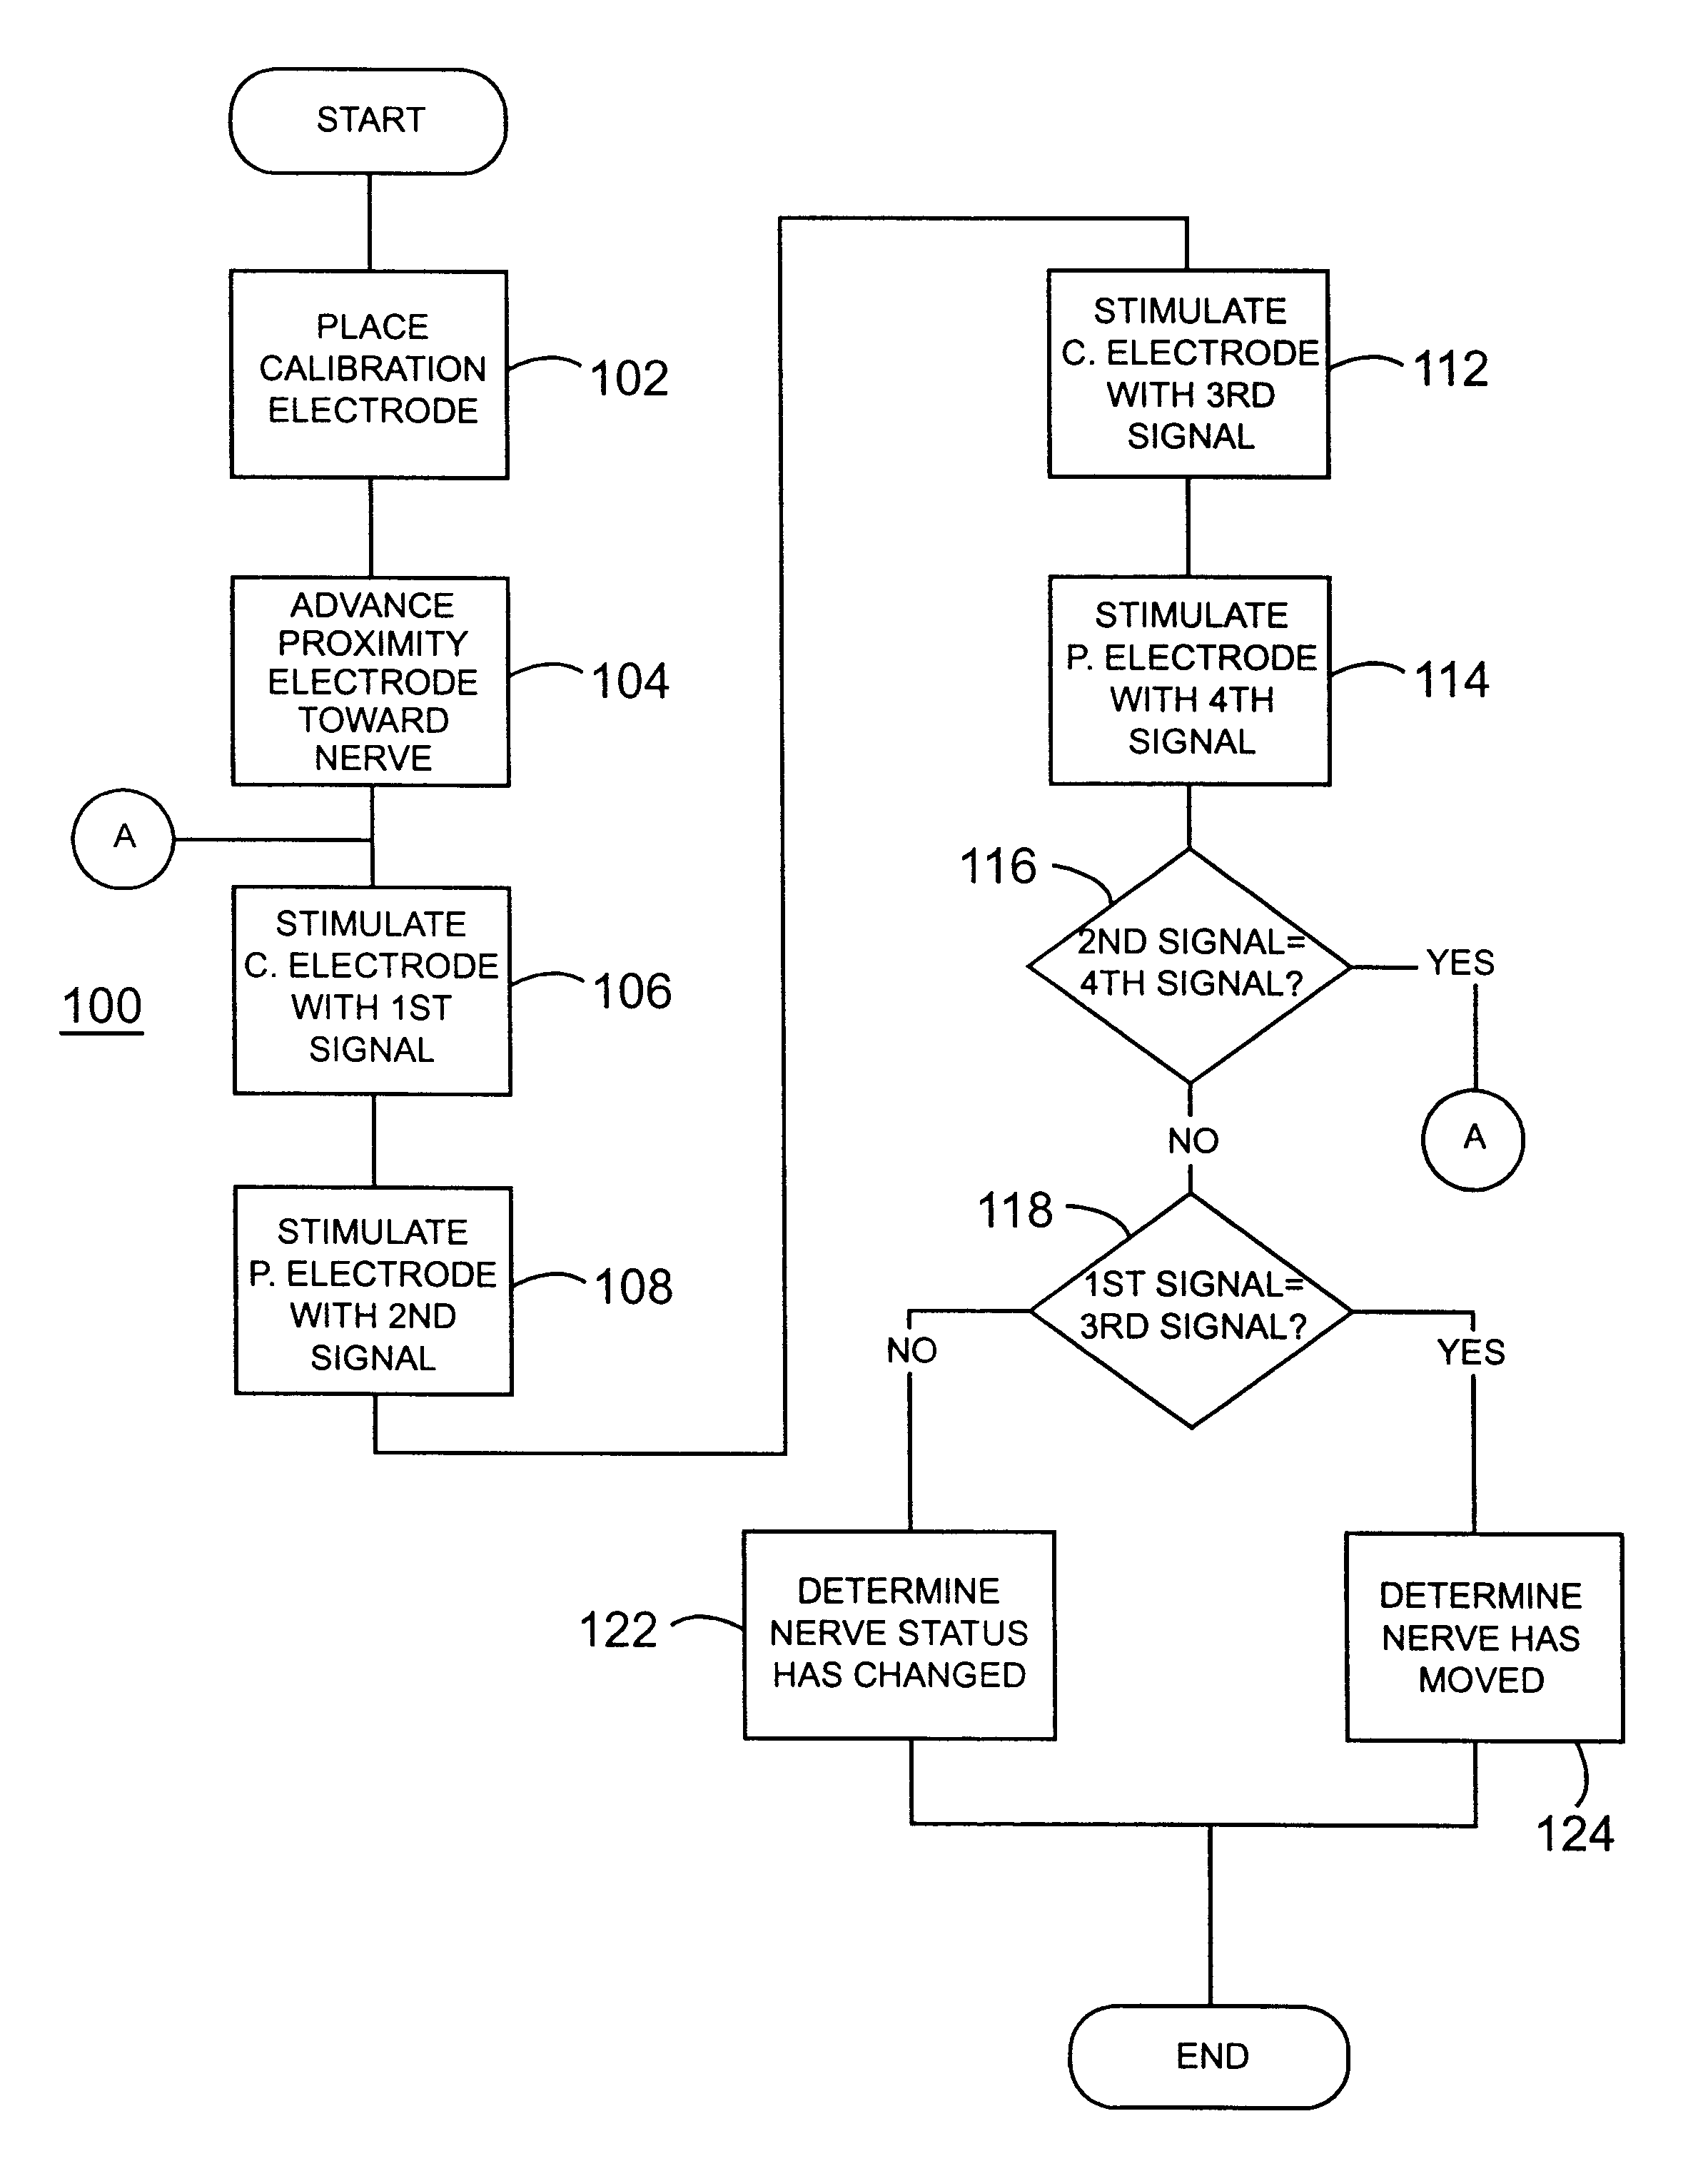 Nerve movement and status detection system and method